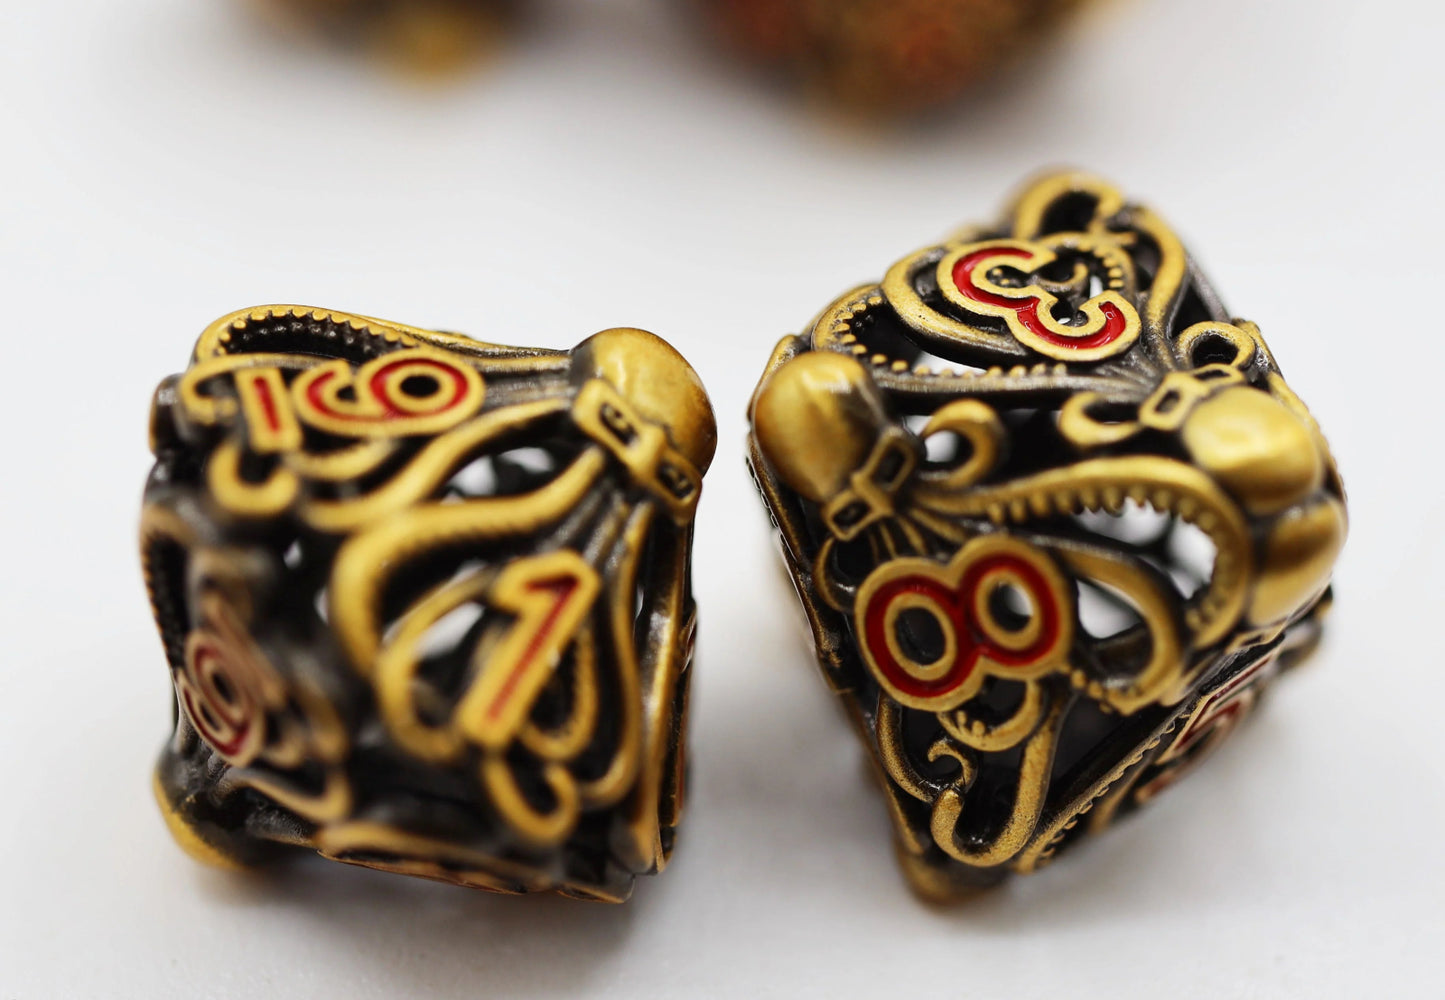 Mind Eater: Gold - Hollow Metal RPG Dice Set - The Fourth Place